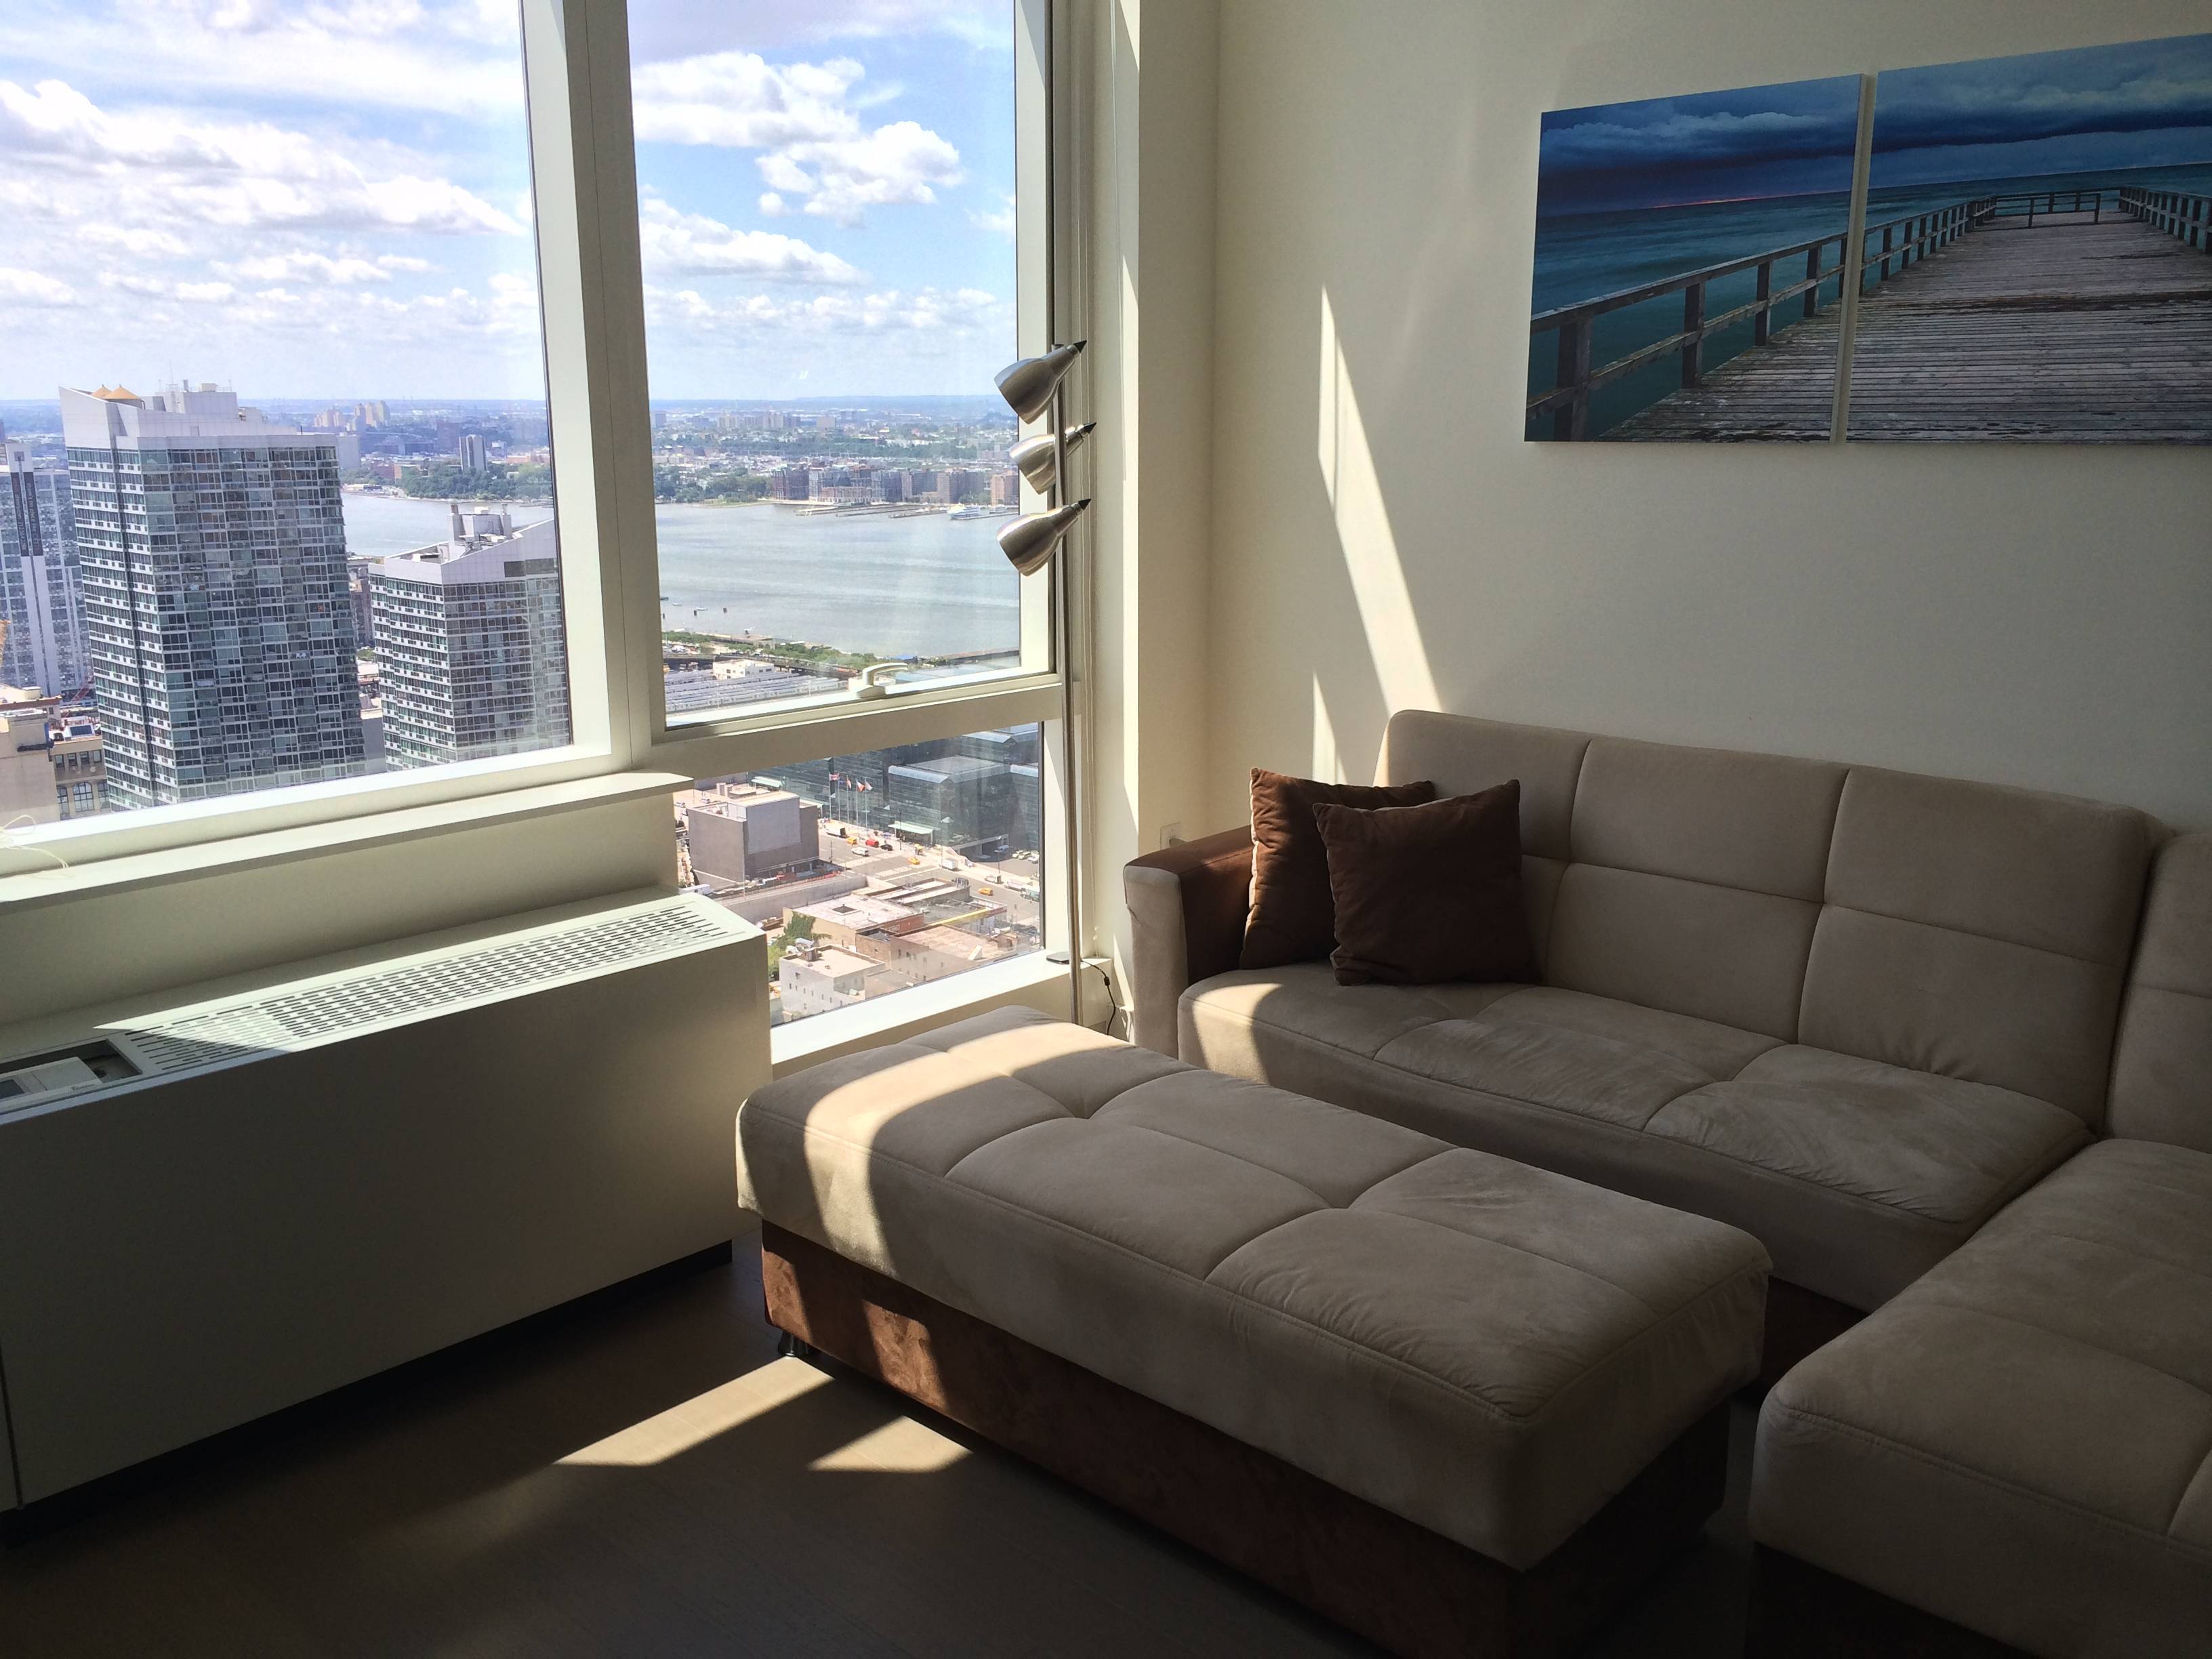 Short term leases ok ! Furnished 800 sq ft Beautiful One Bedroom Apt in Mima Ultra Luxury Tower . Incredible views from the 50th floor- The only floor with EXTRA high ceilings ! Washer/ Dryer in the apt. Equinox health club in the buliding + Much More ! 